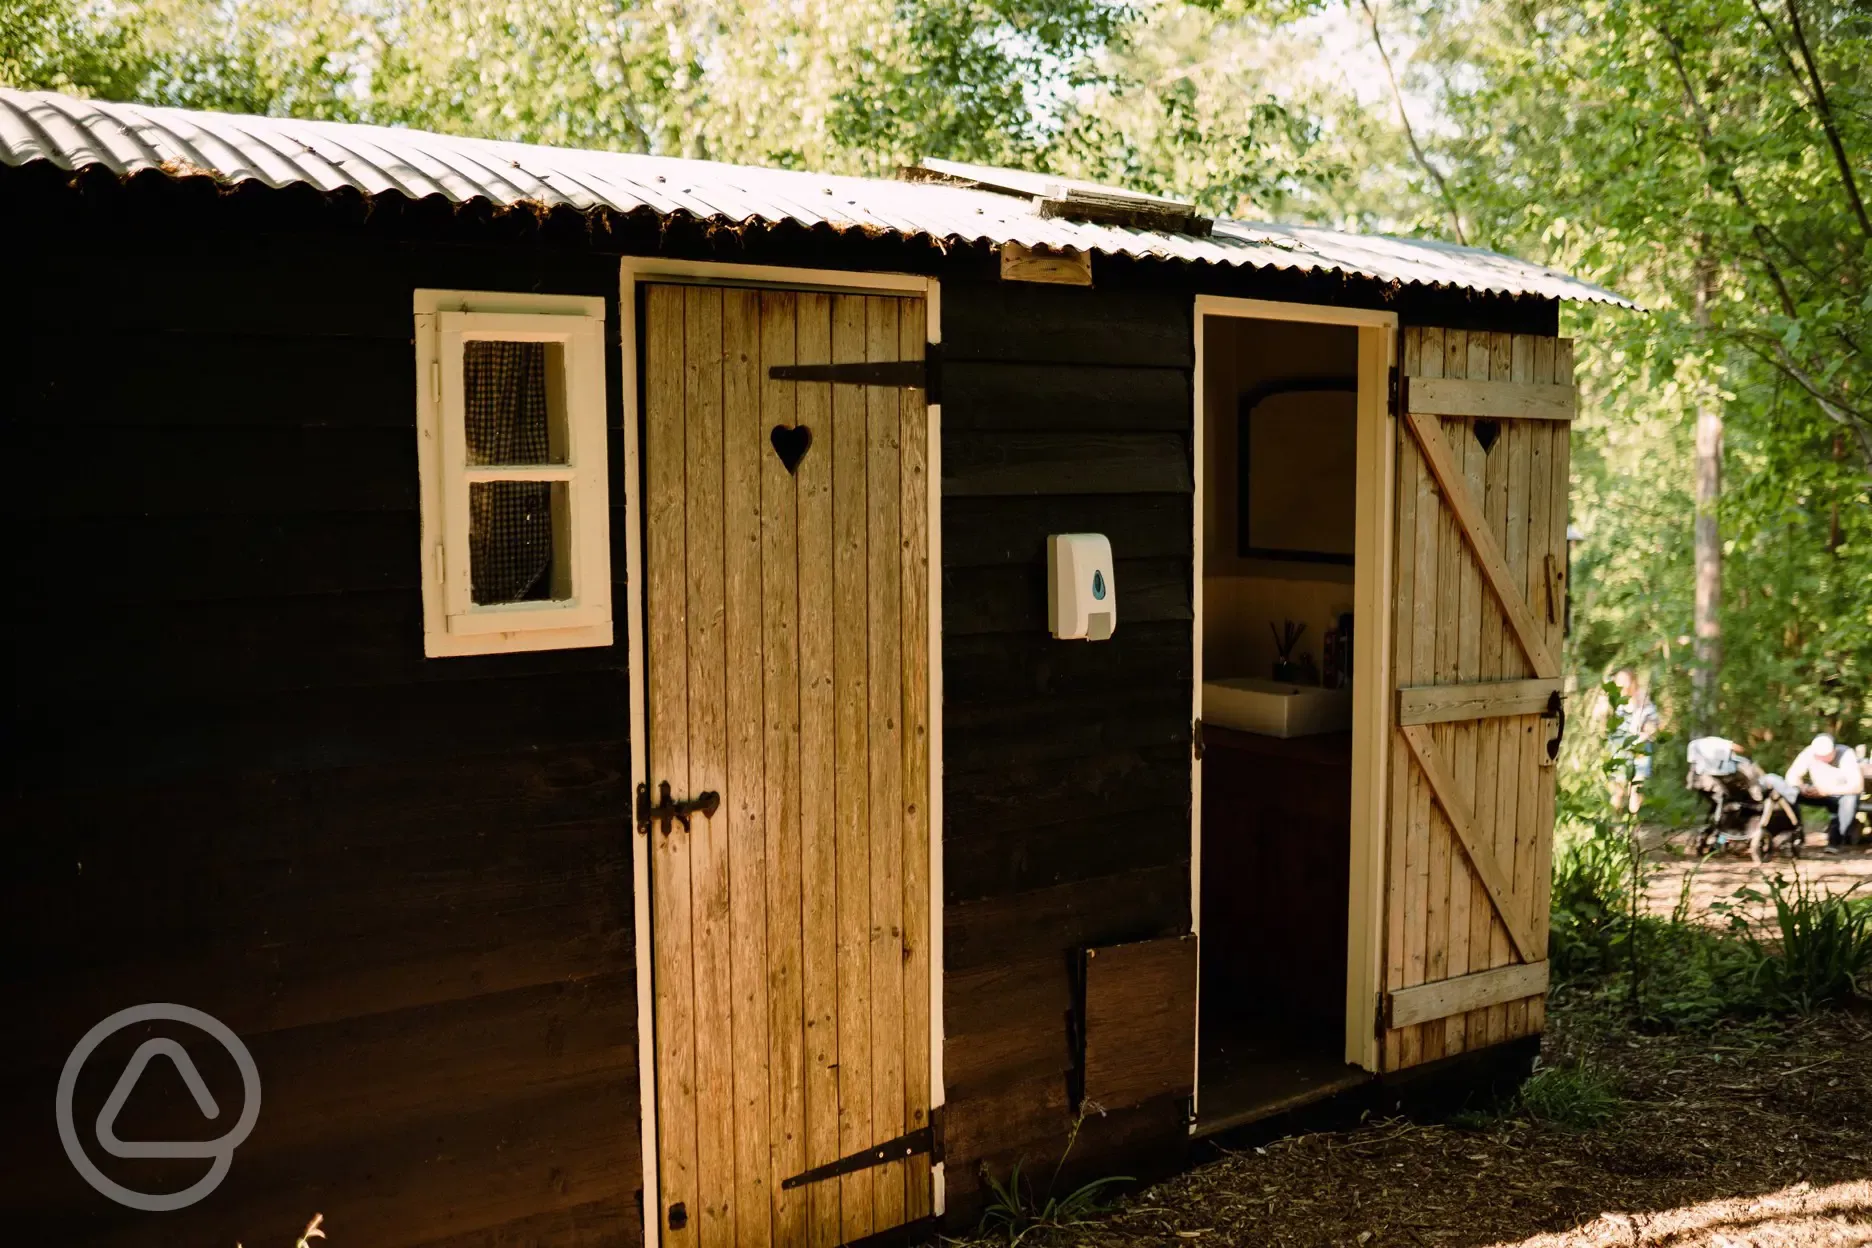 The shower and toilet hut